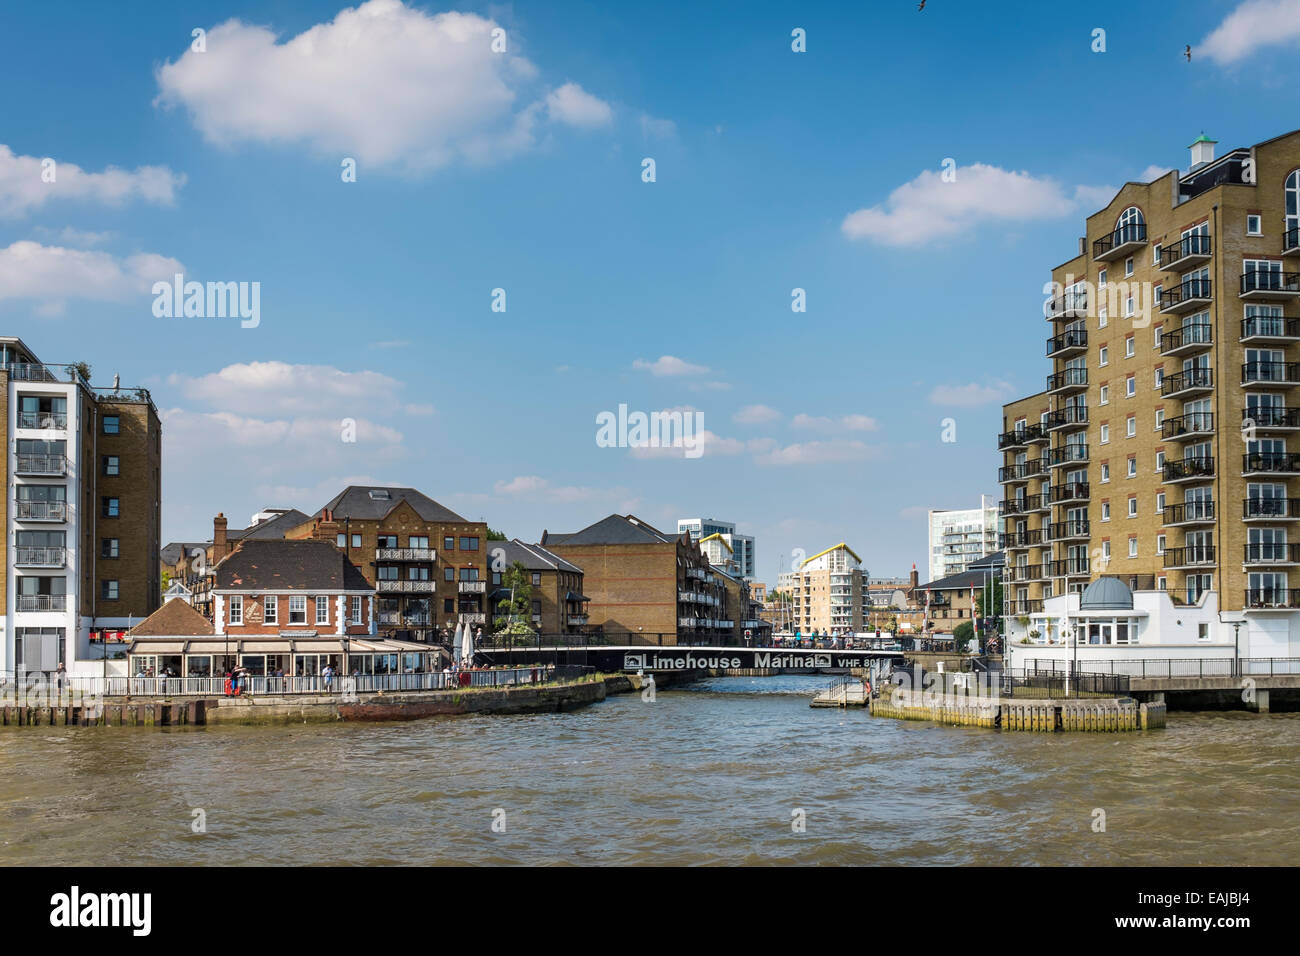 Mixed architecture of Limehouse Marina on the north bank of the River Thames, viewed from a passing boat. Stock Photo